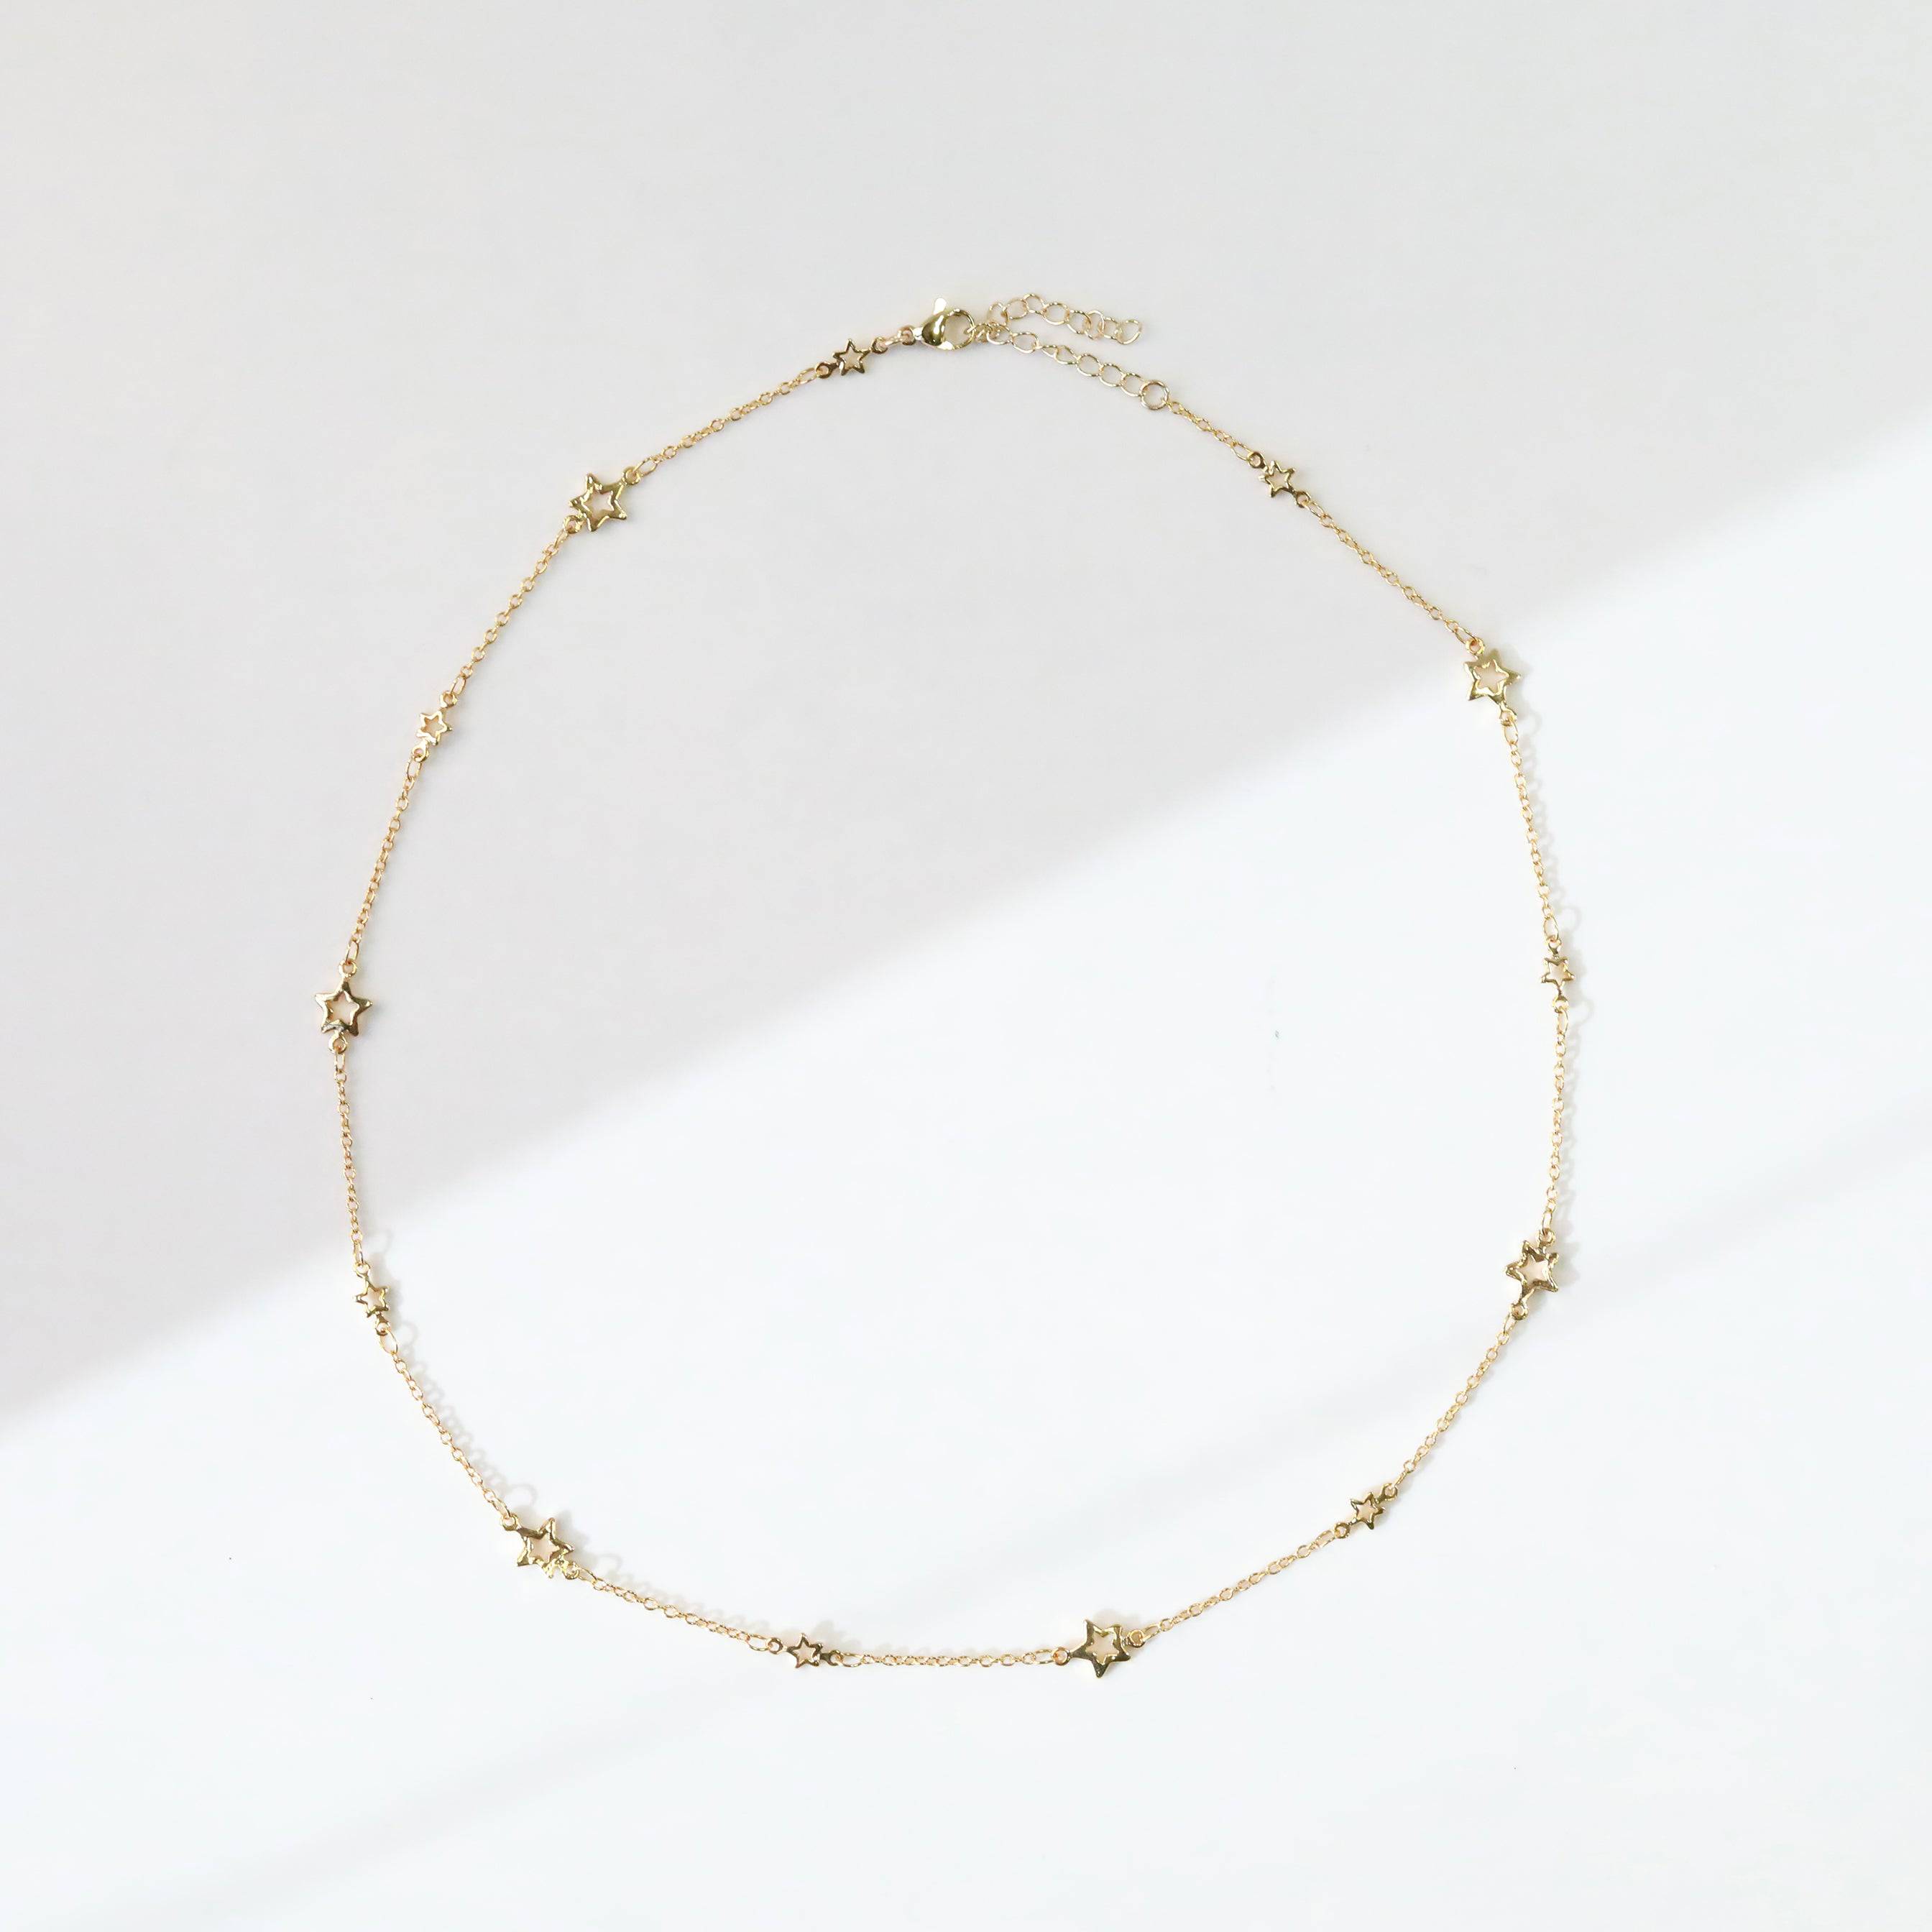 Constellation Necklace - The Gilded Witch